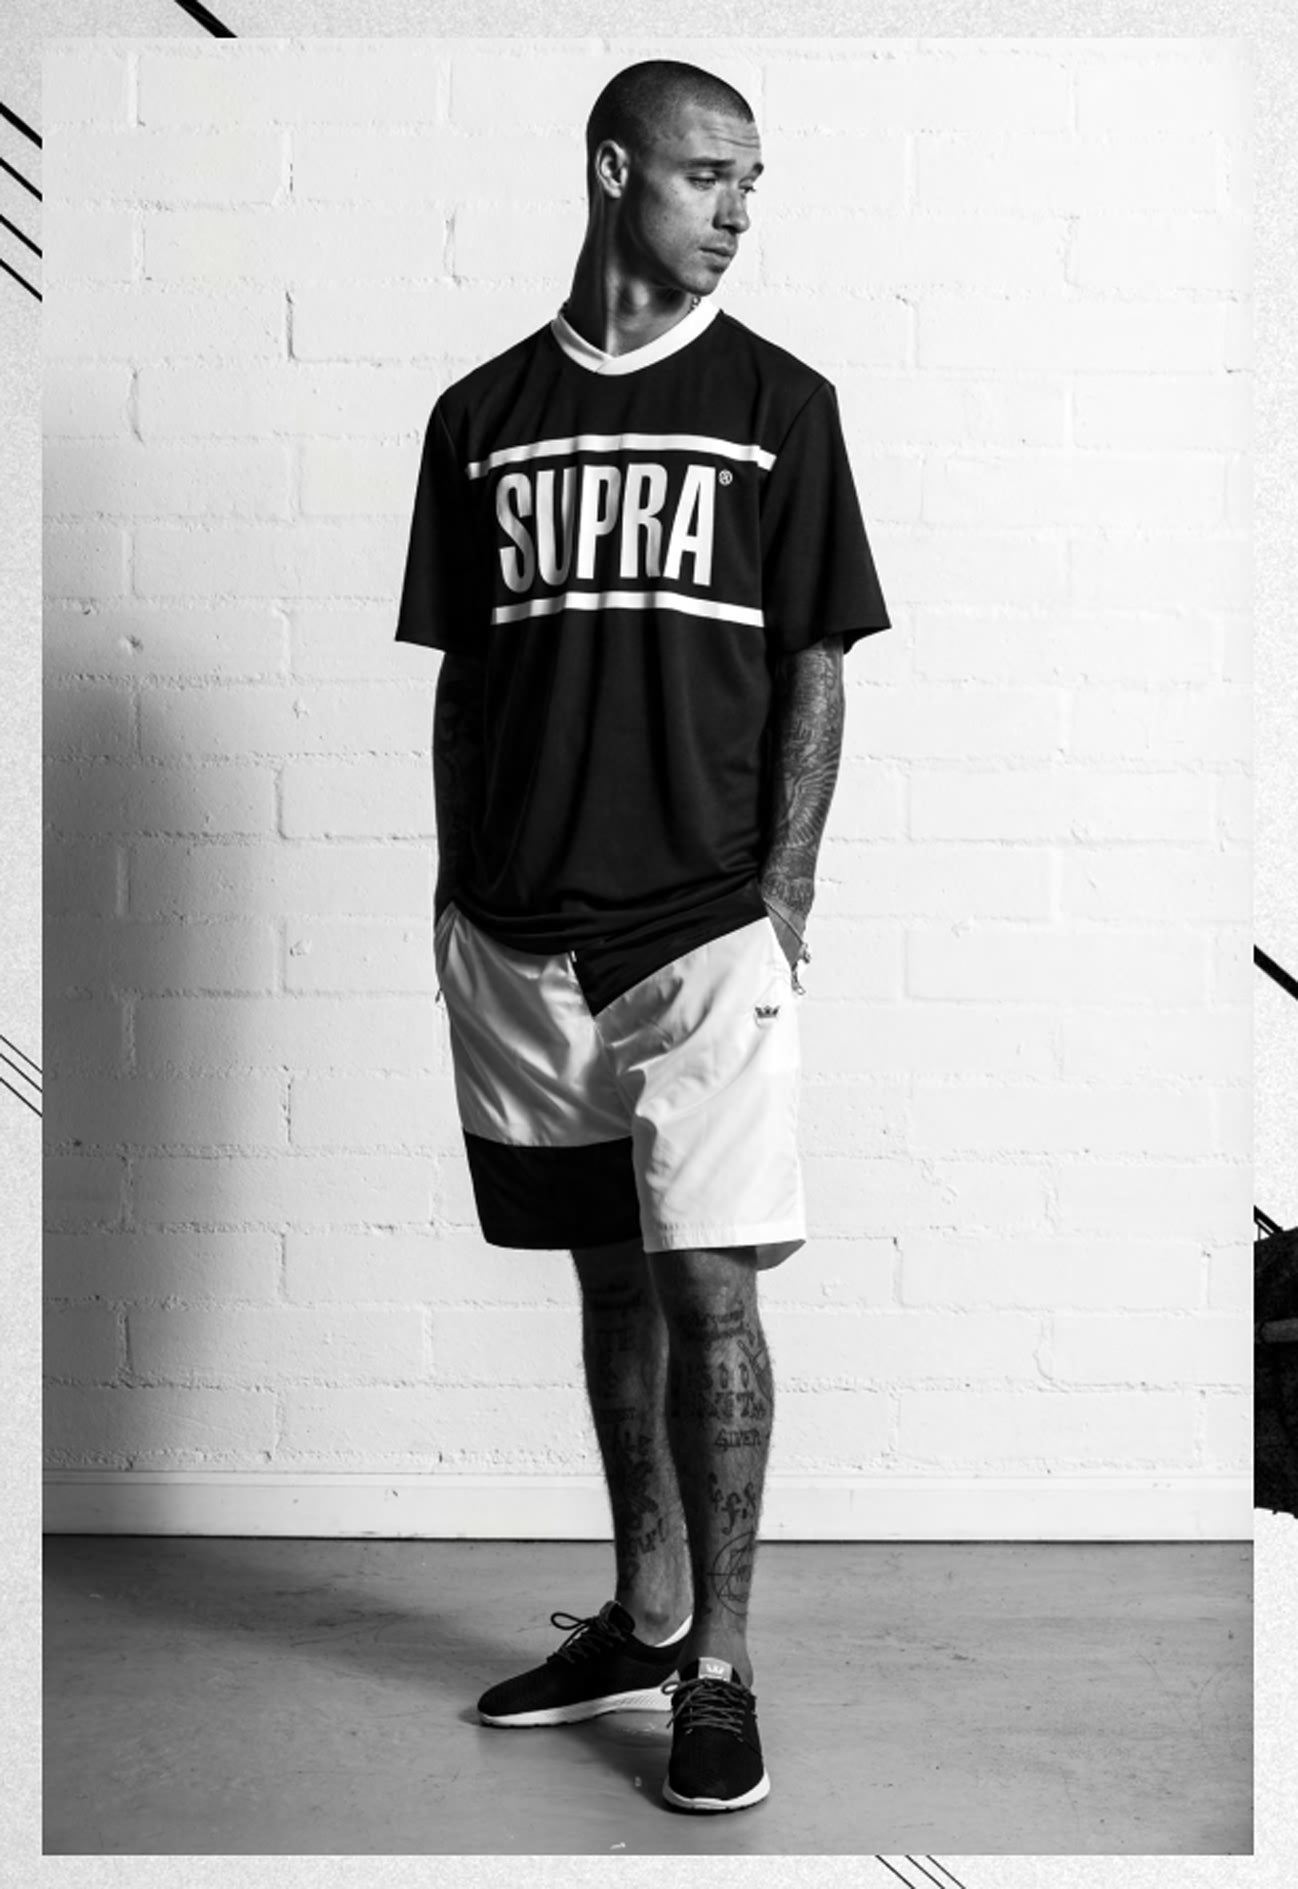 Supra Summer Clothing Q2 2017 Mens Sportswear and Accessories